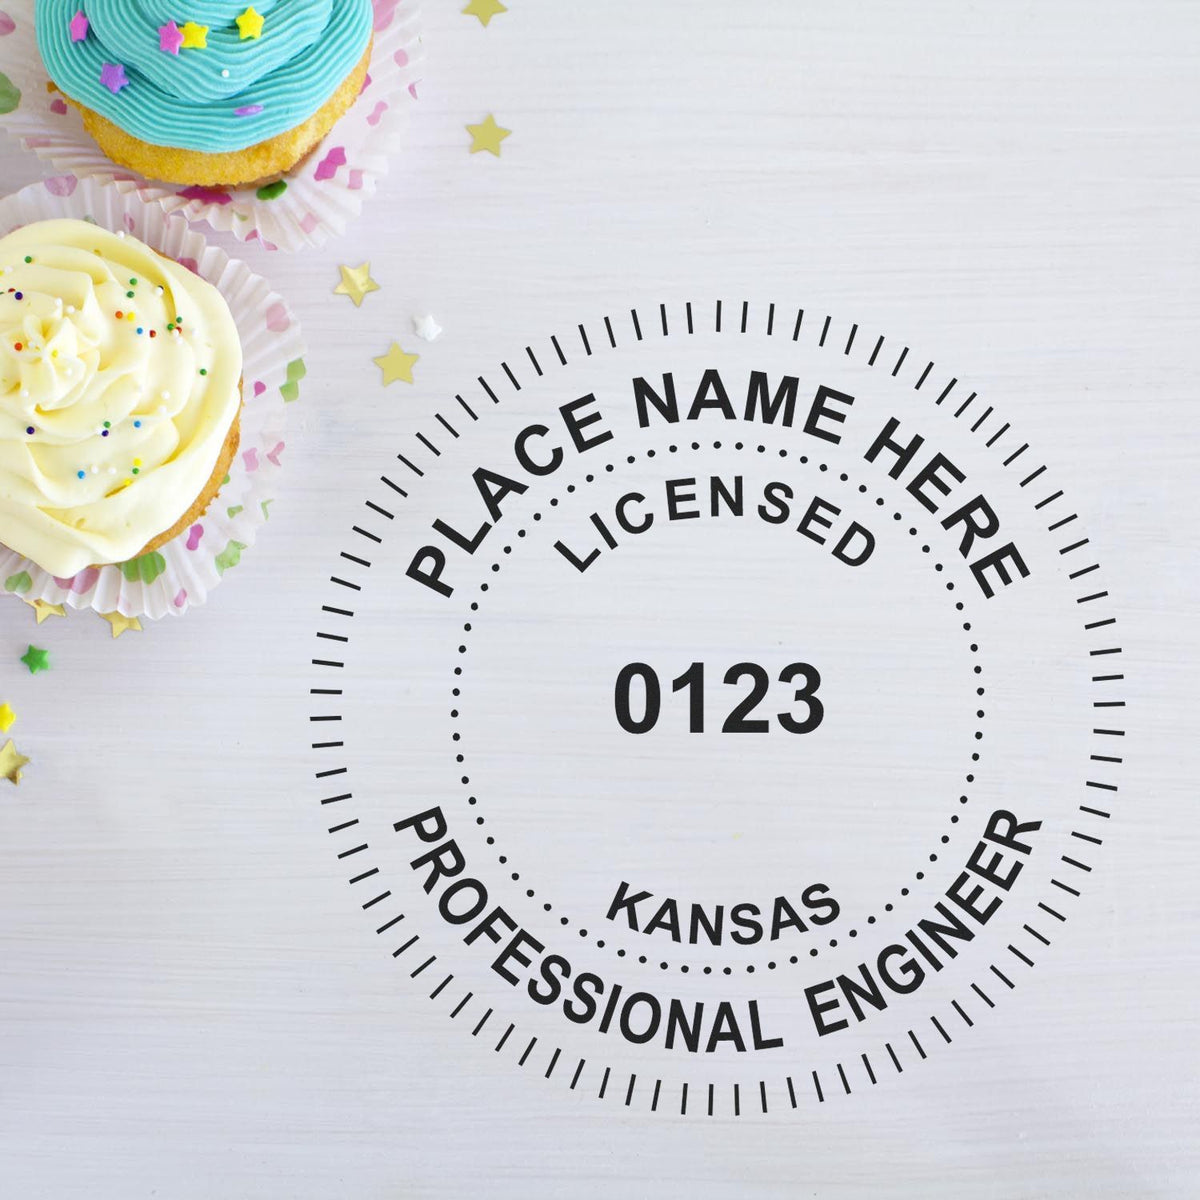 A stamped impression of the Digital Kansas PE Stamp and Electronic Seal for Kansas Engineer in this stylish lifestyle photo, setting the tone for a unique and personalized product.